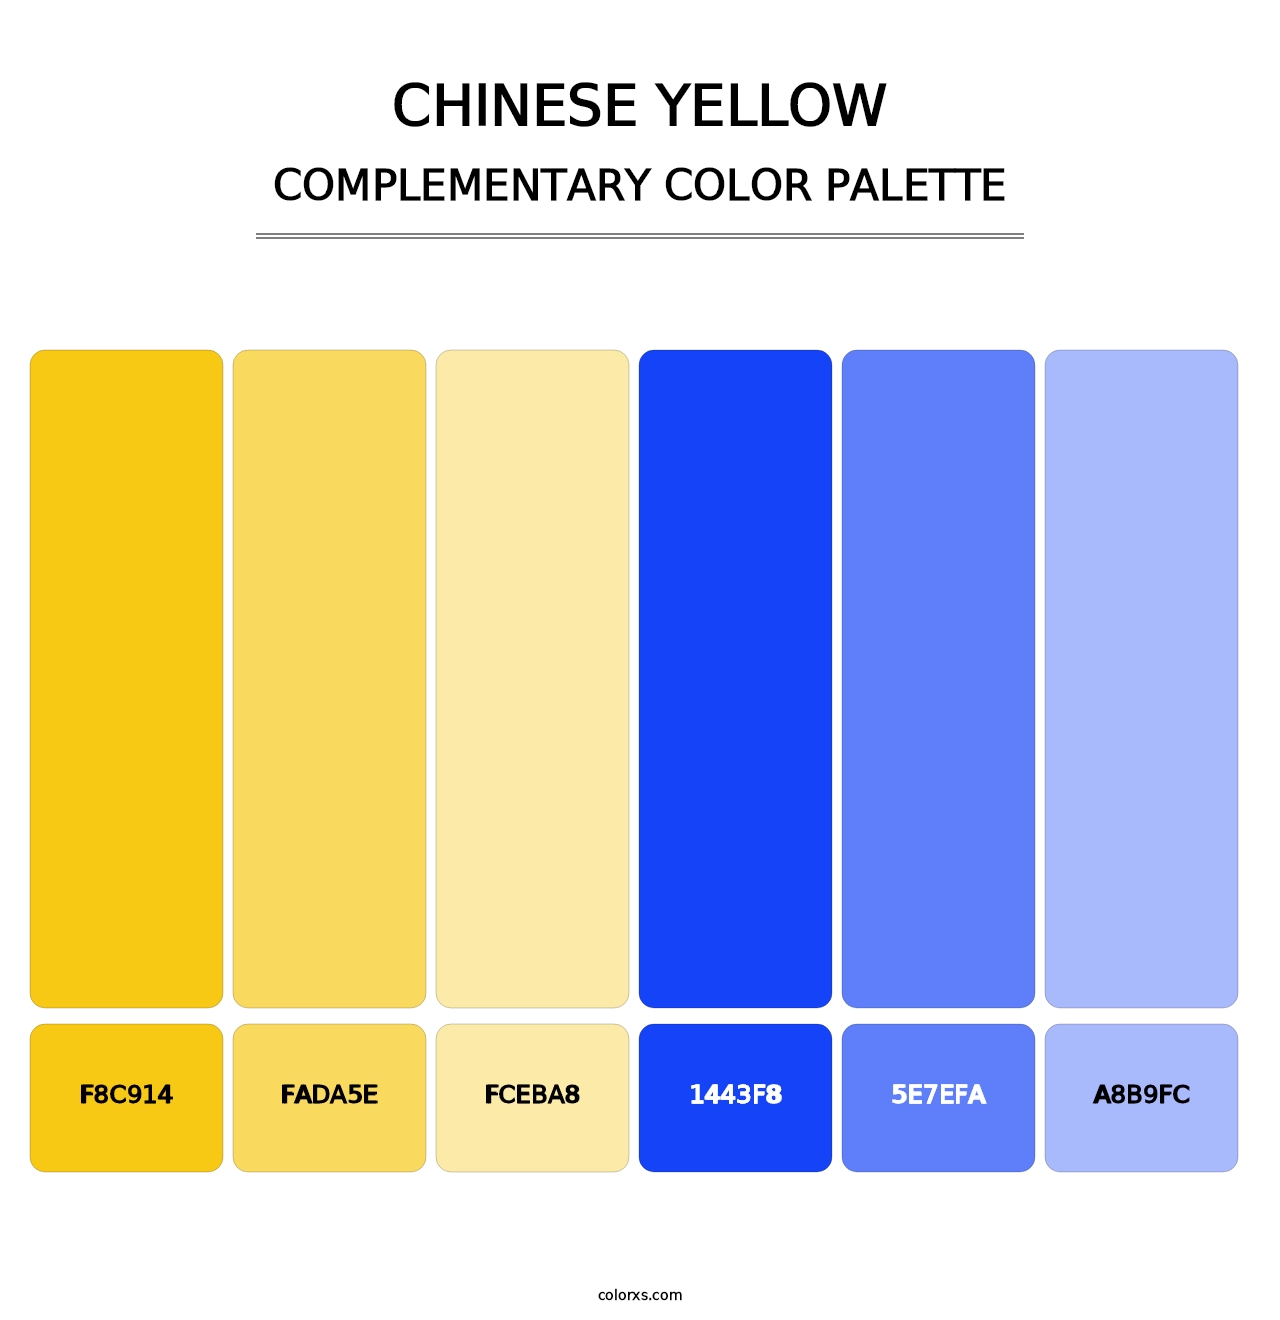 Chinese Yellow - Complementary Color Palette